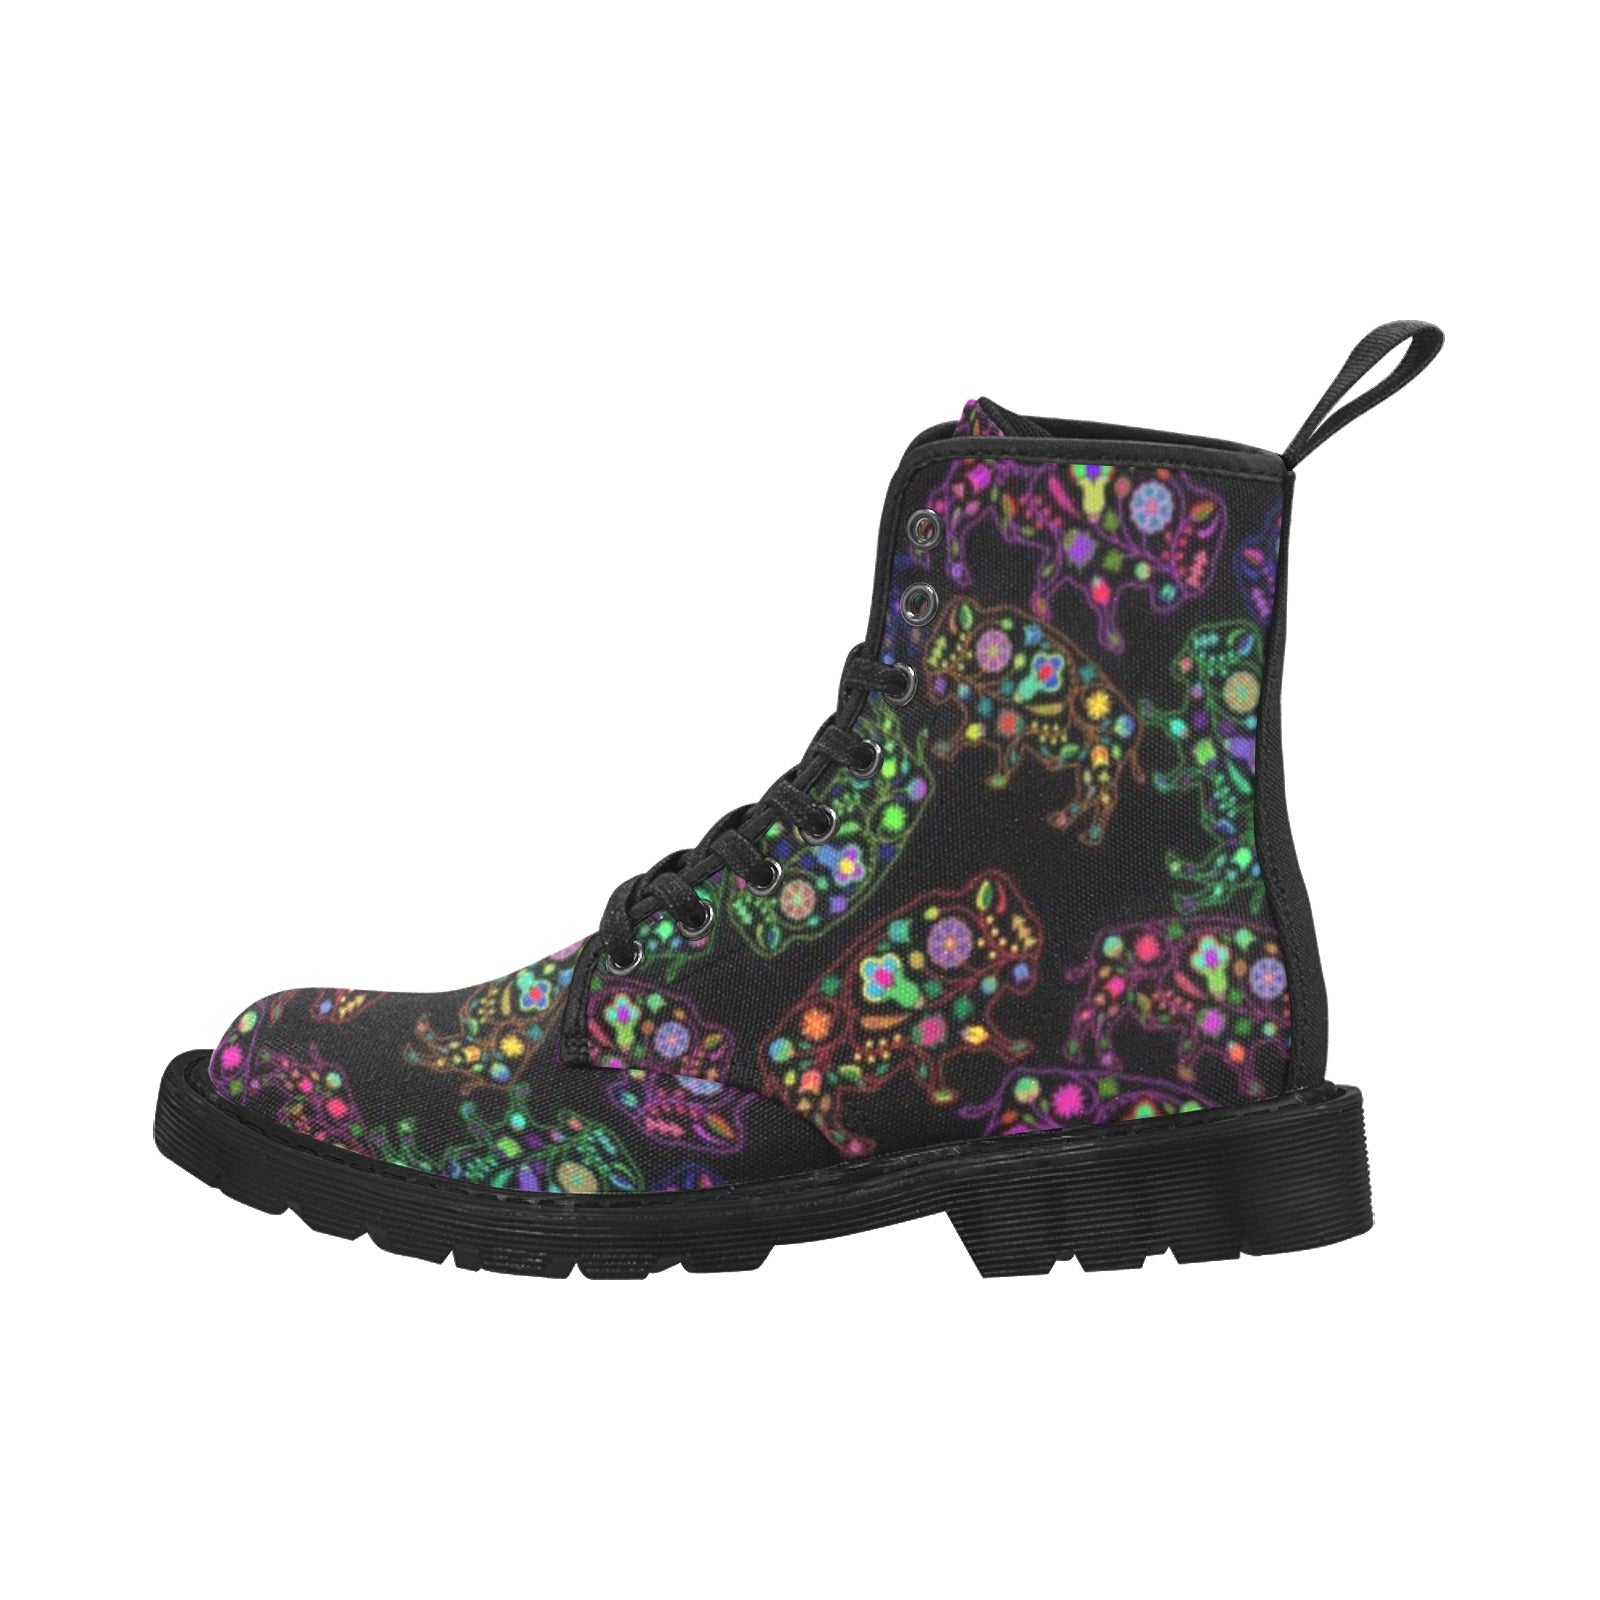 Neon Floral Buffalos Boots for Women (Black)